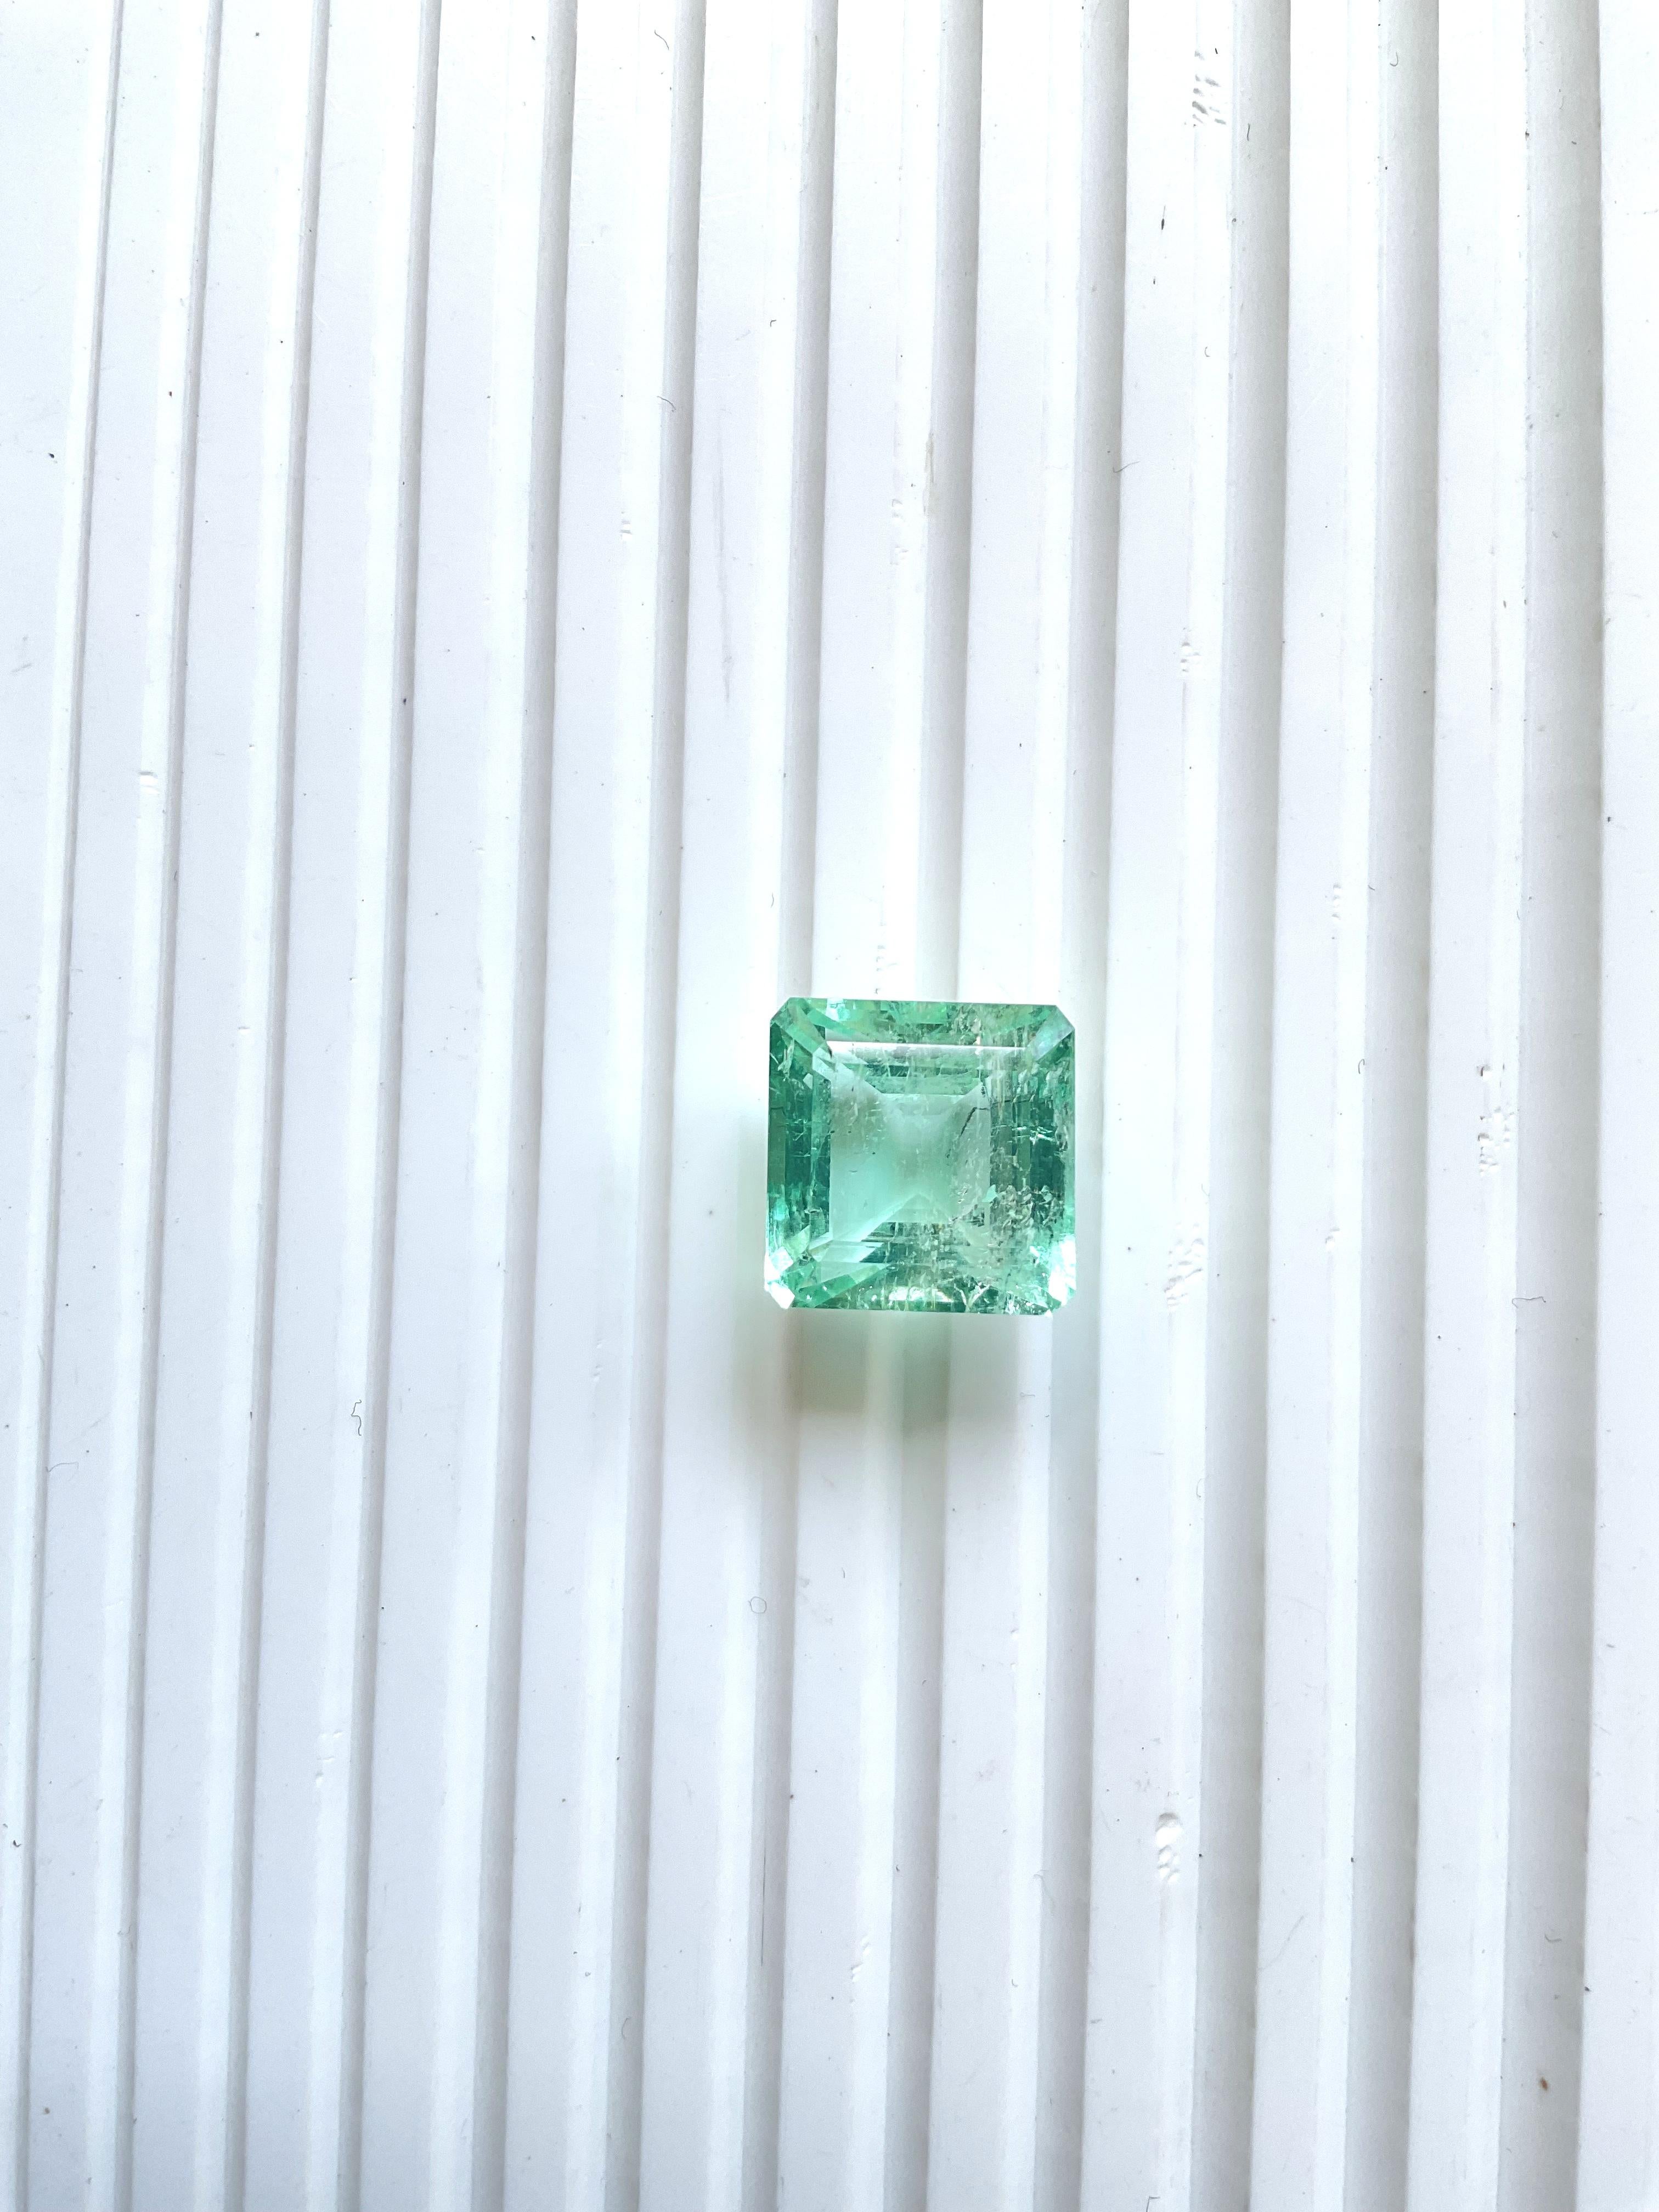 Russian Emerald Princess Cut for Fine Jewelry Ring  Natural Gemstone
Gemstone - Emerald
Weight  - 20.82 Carats
Size - 14.5x11 MM
